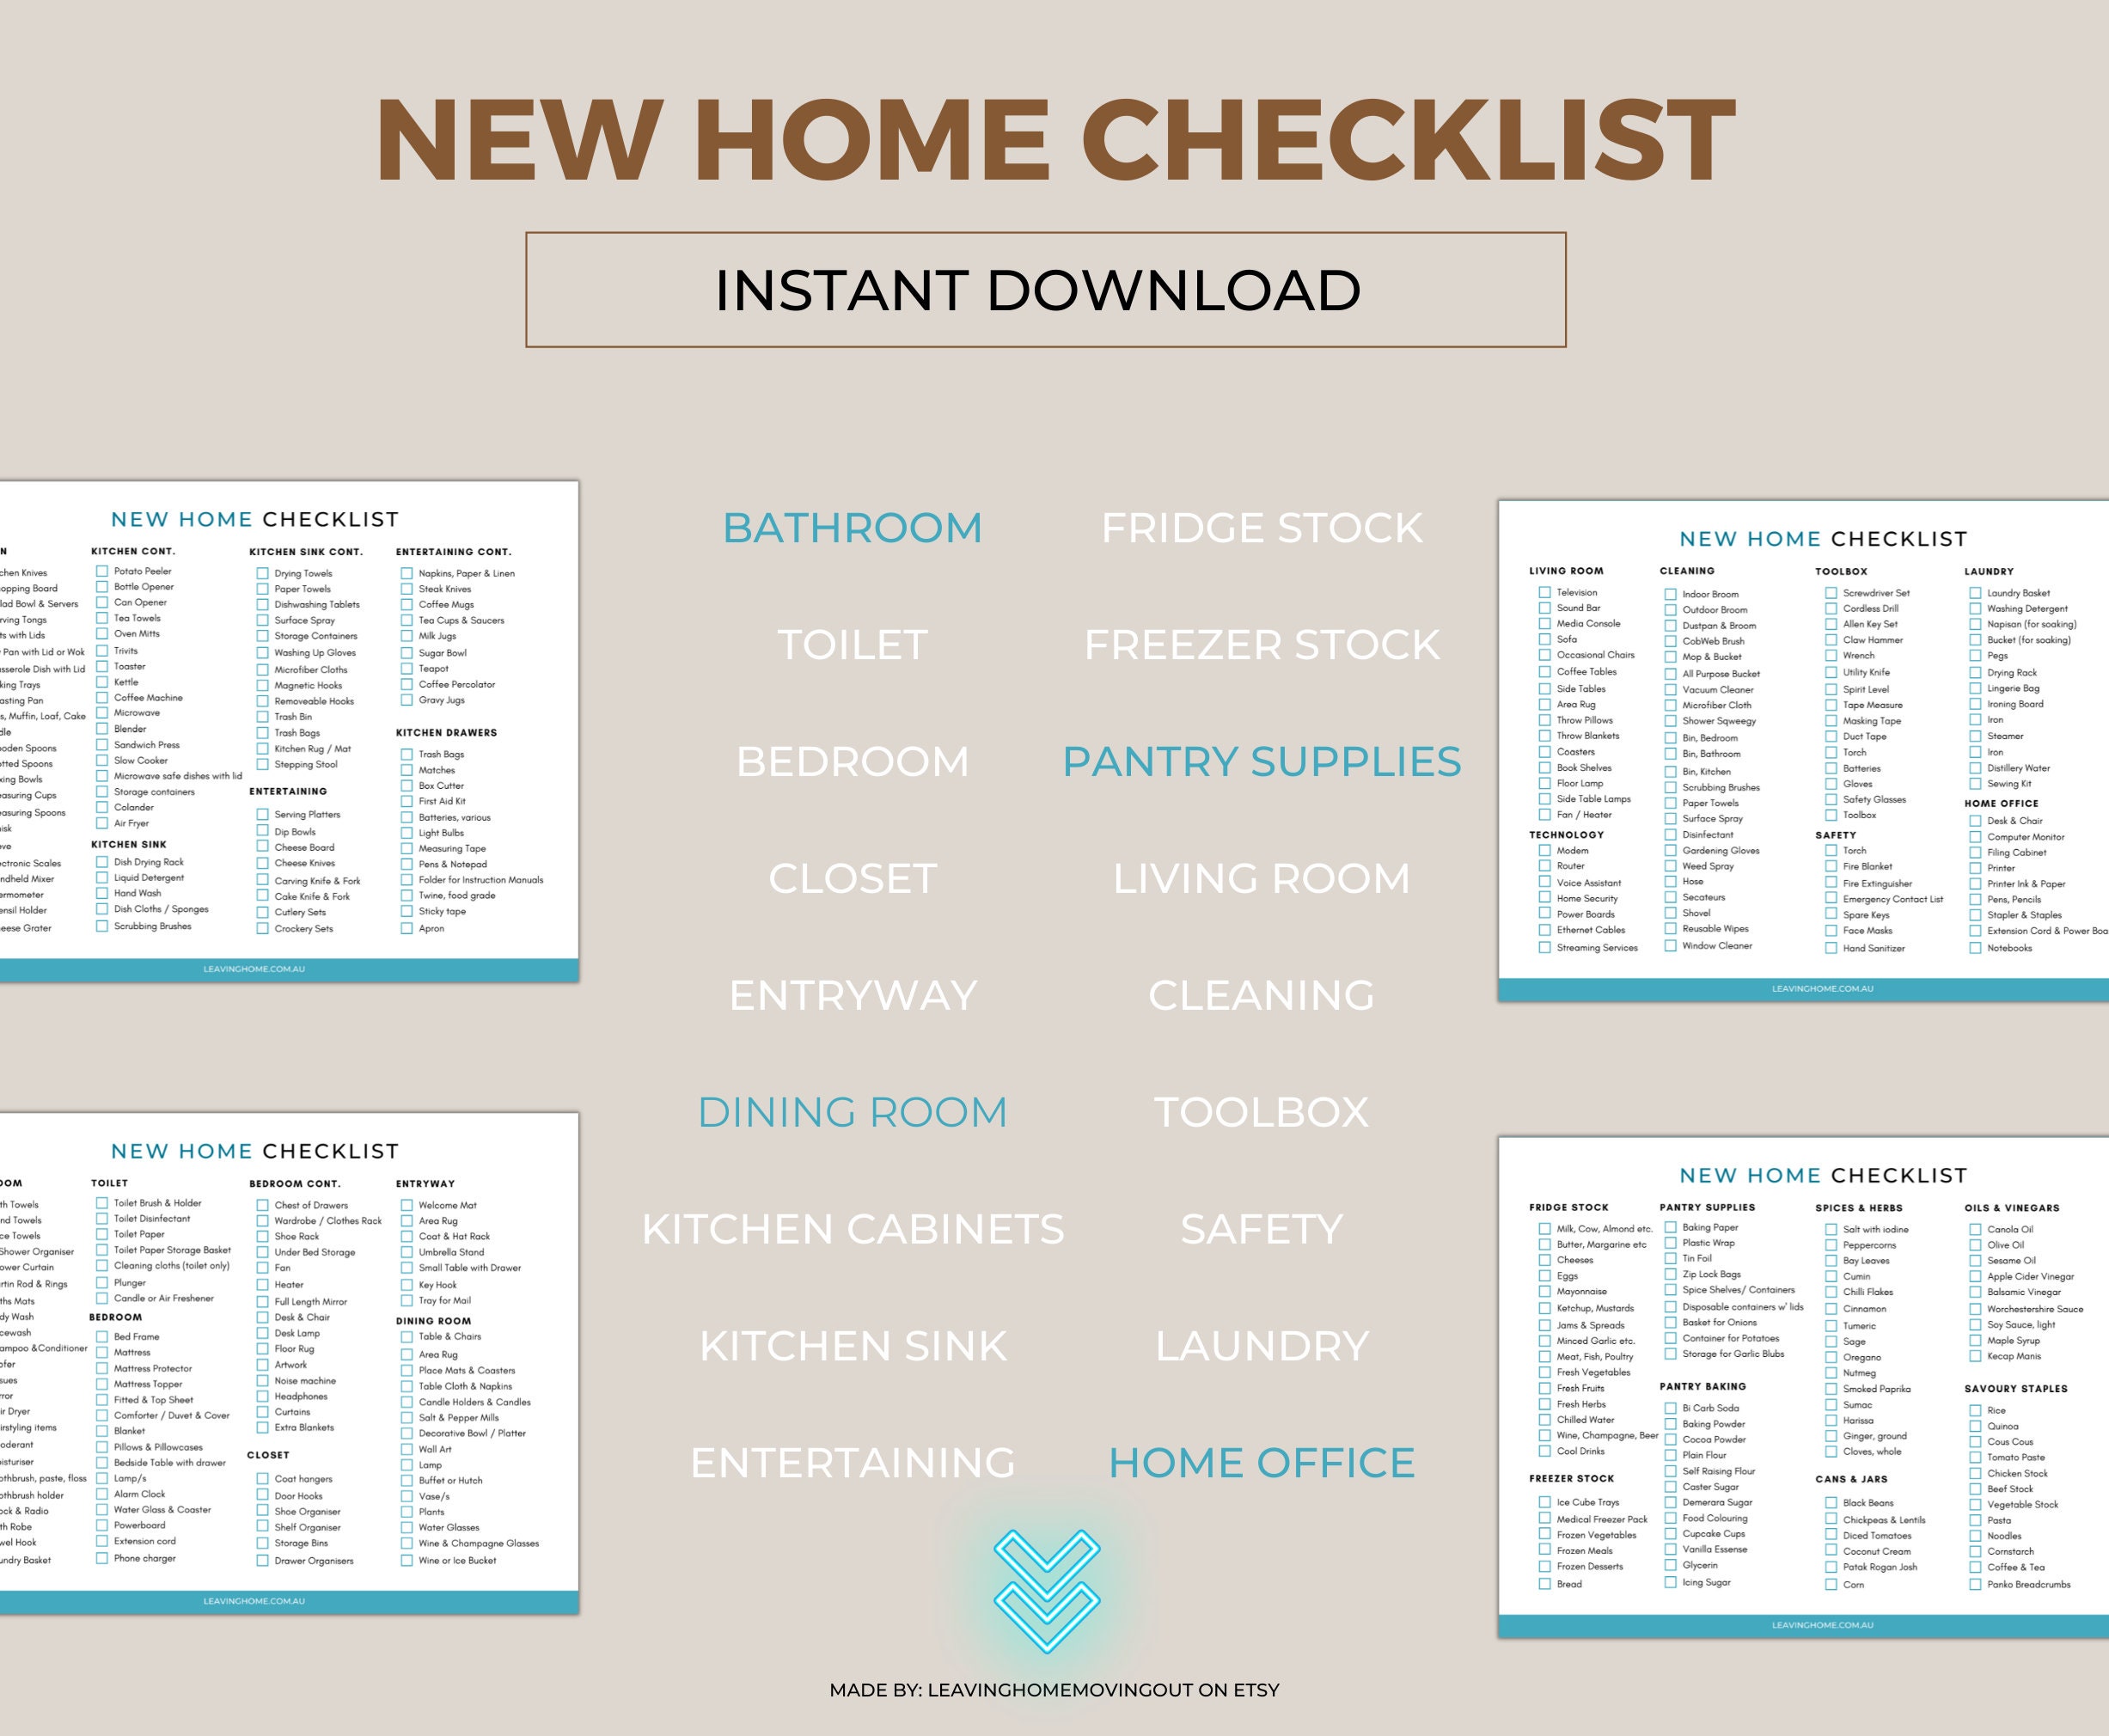 New Home Essentials Checklist: 11 Must-Haves You Need After a Big